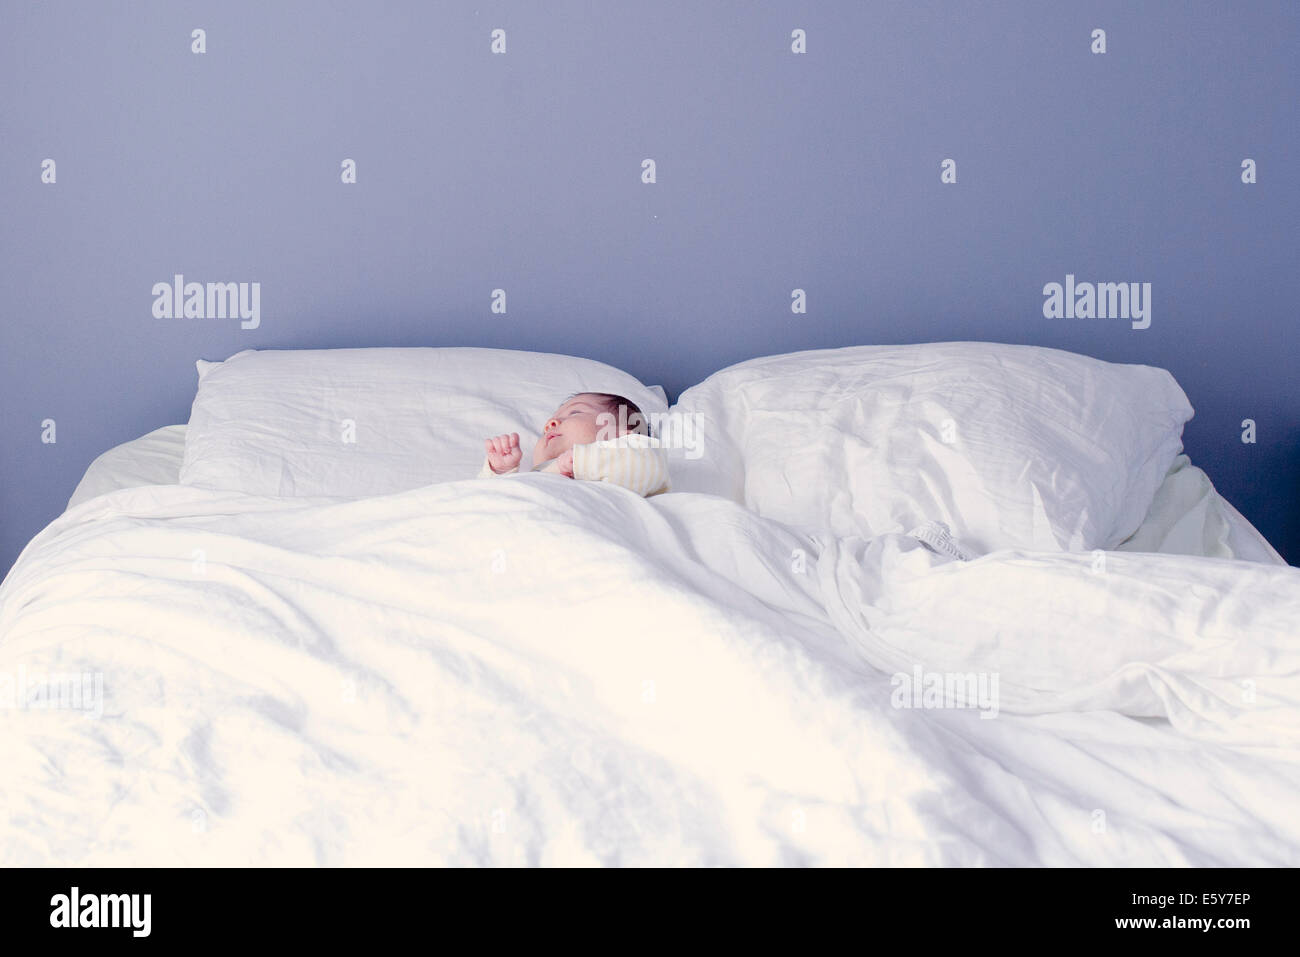 New Born Baby sleeping in bed Banque D'Images